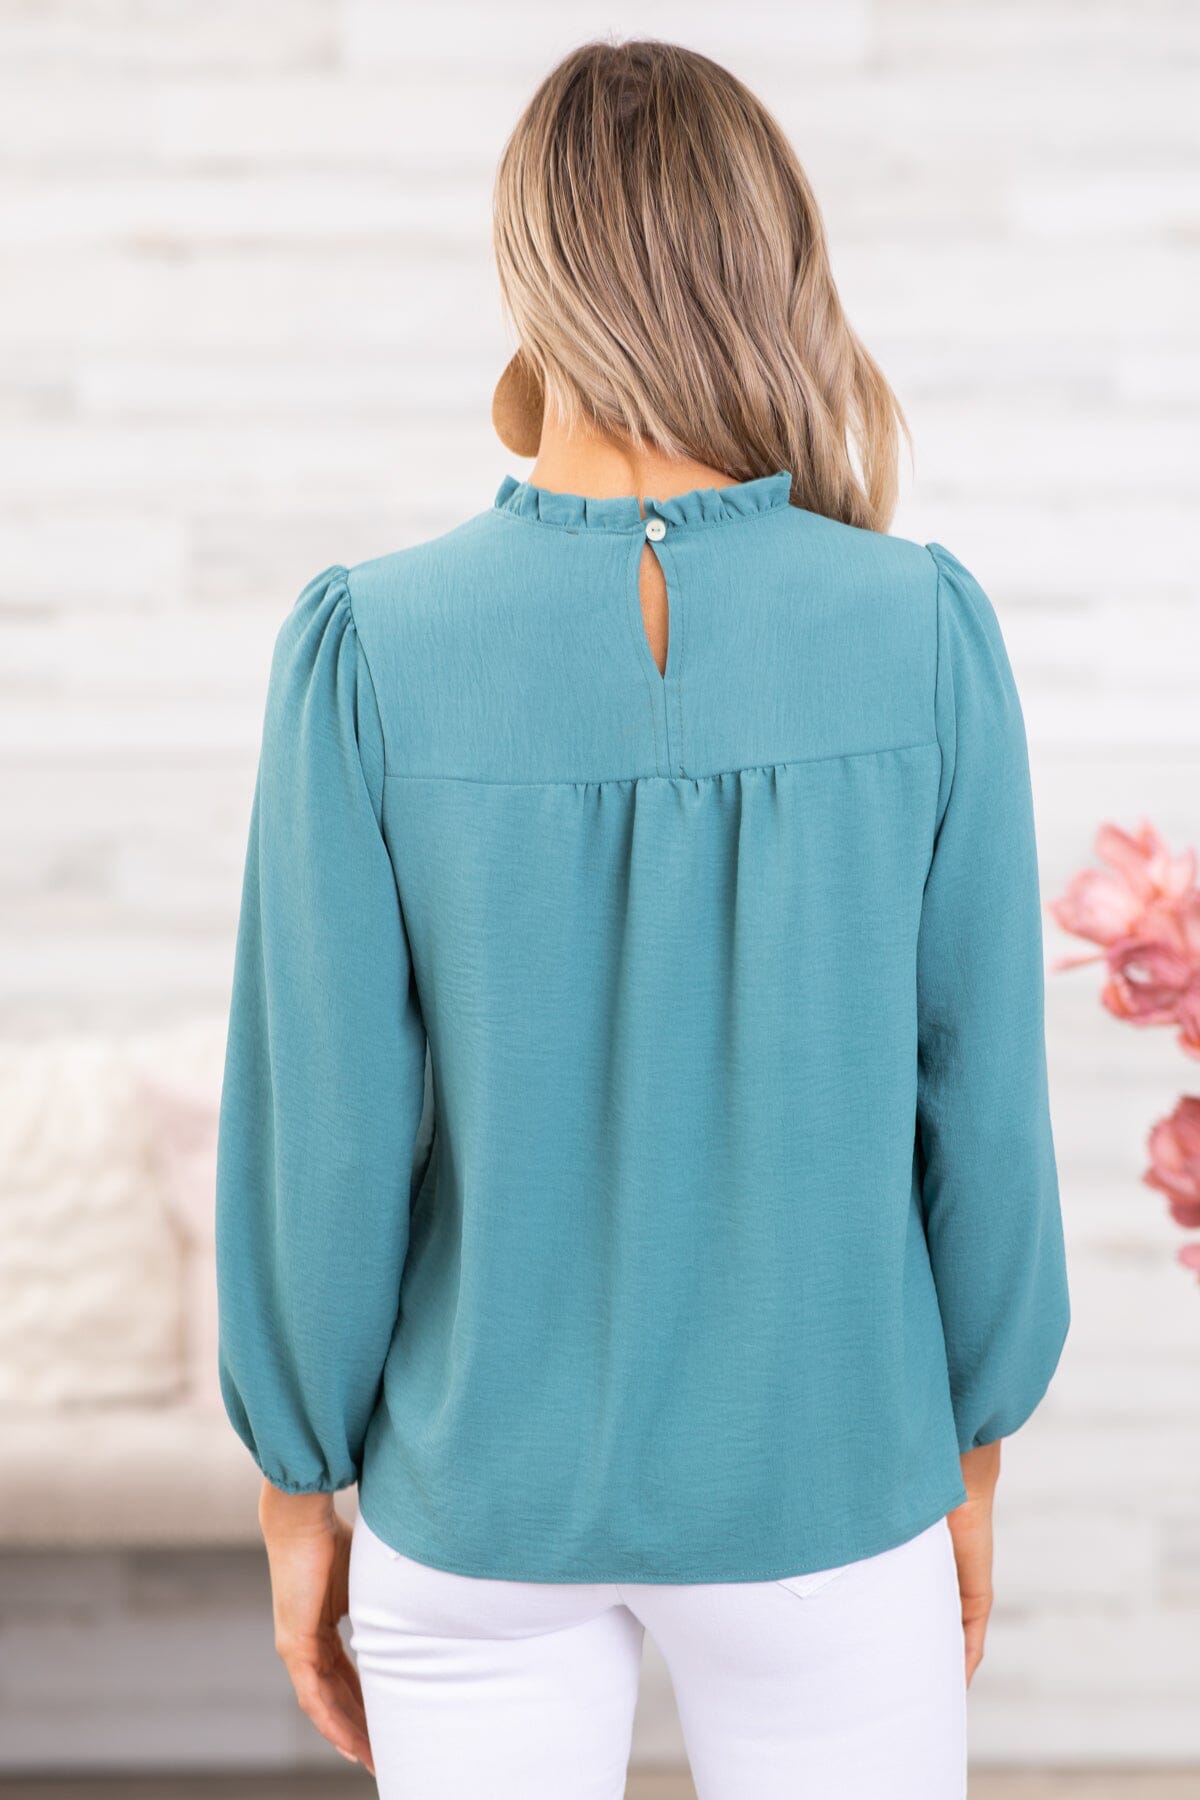 Teal Ruffle Trim Long Sleeve Top - Filly Flair